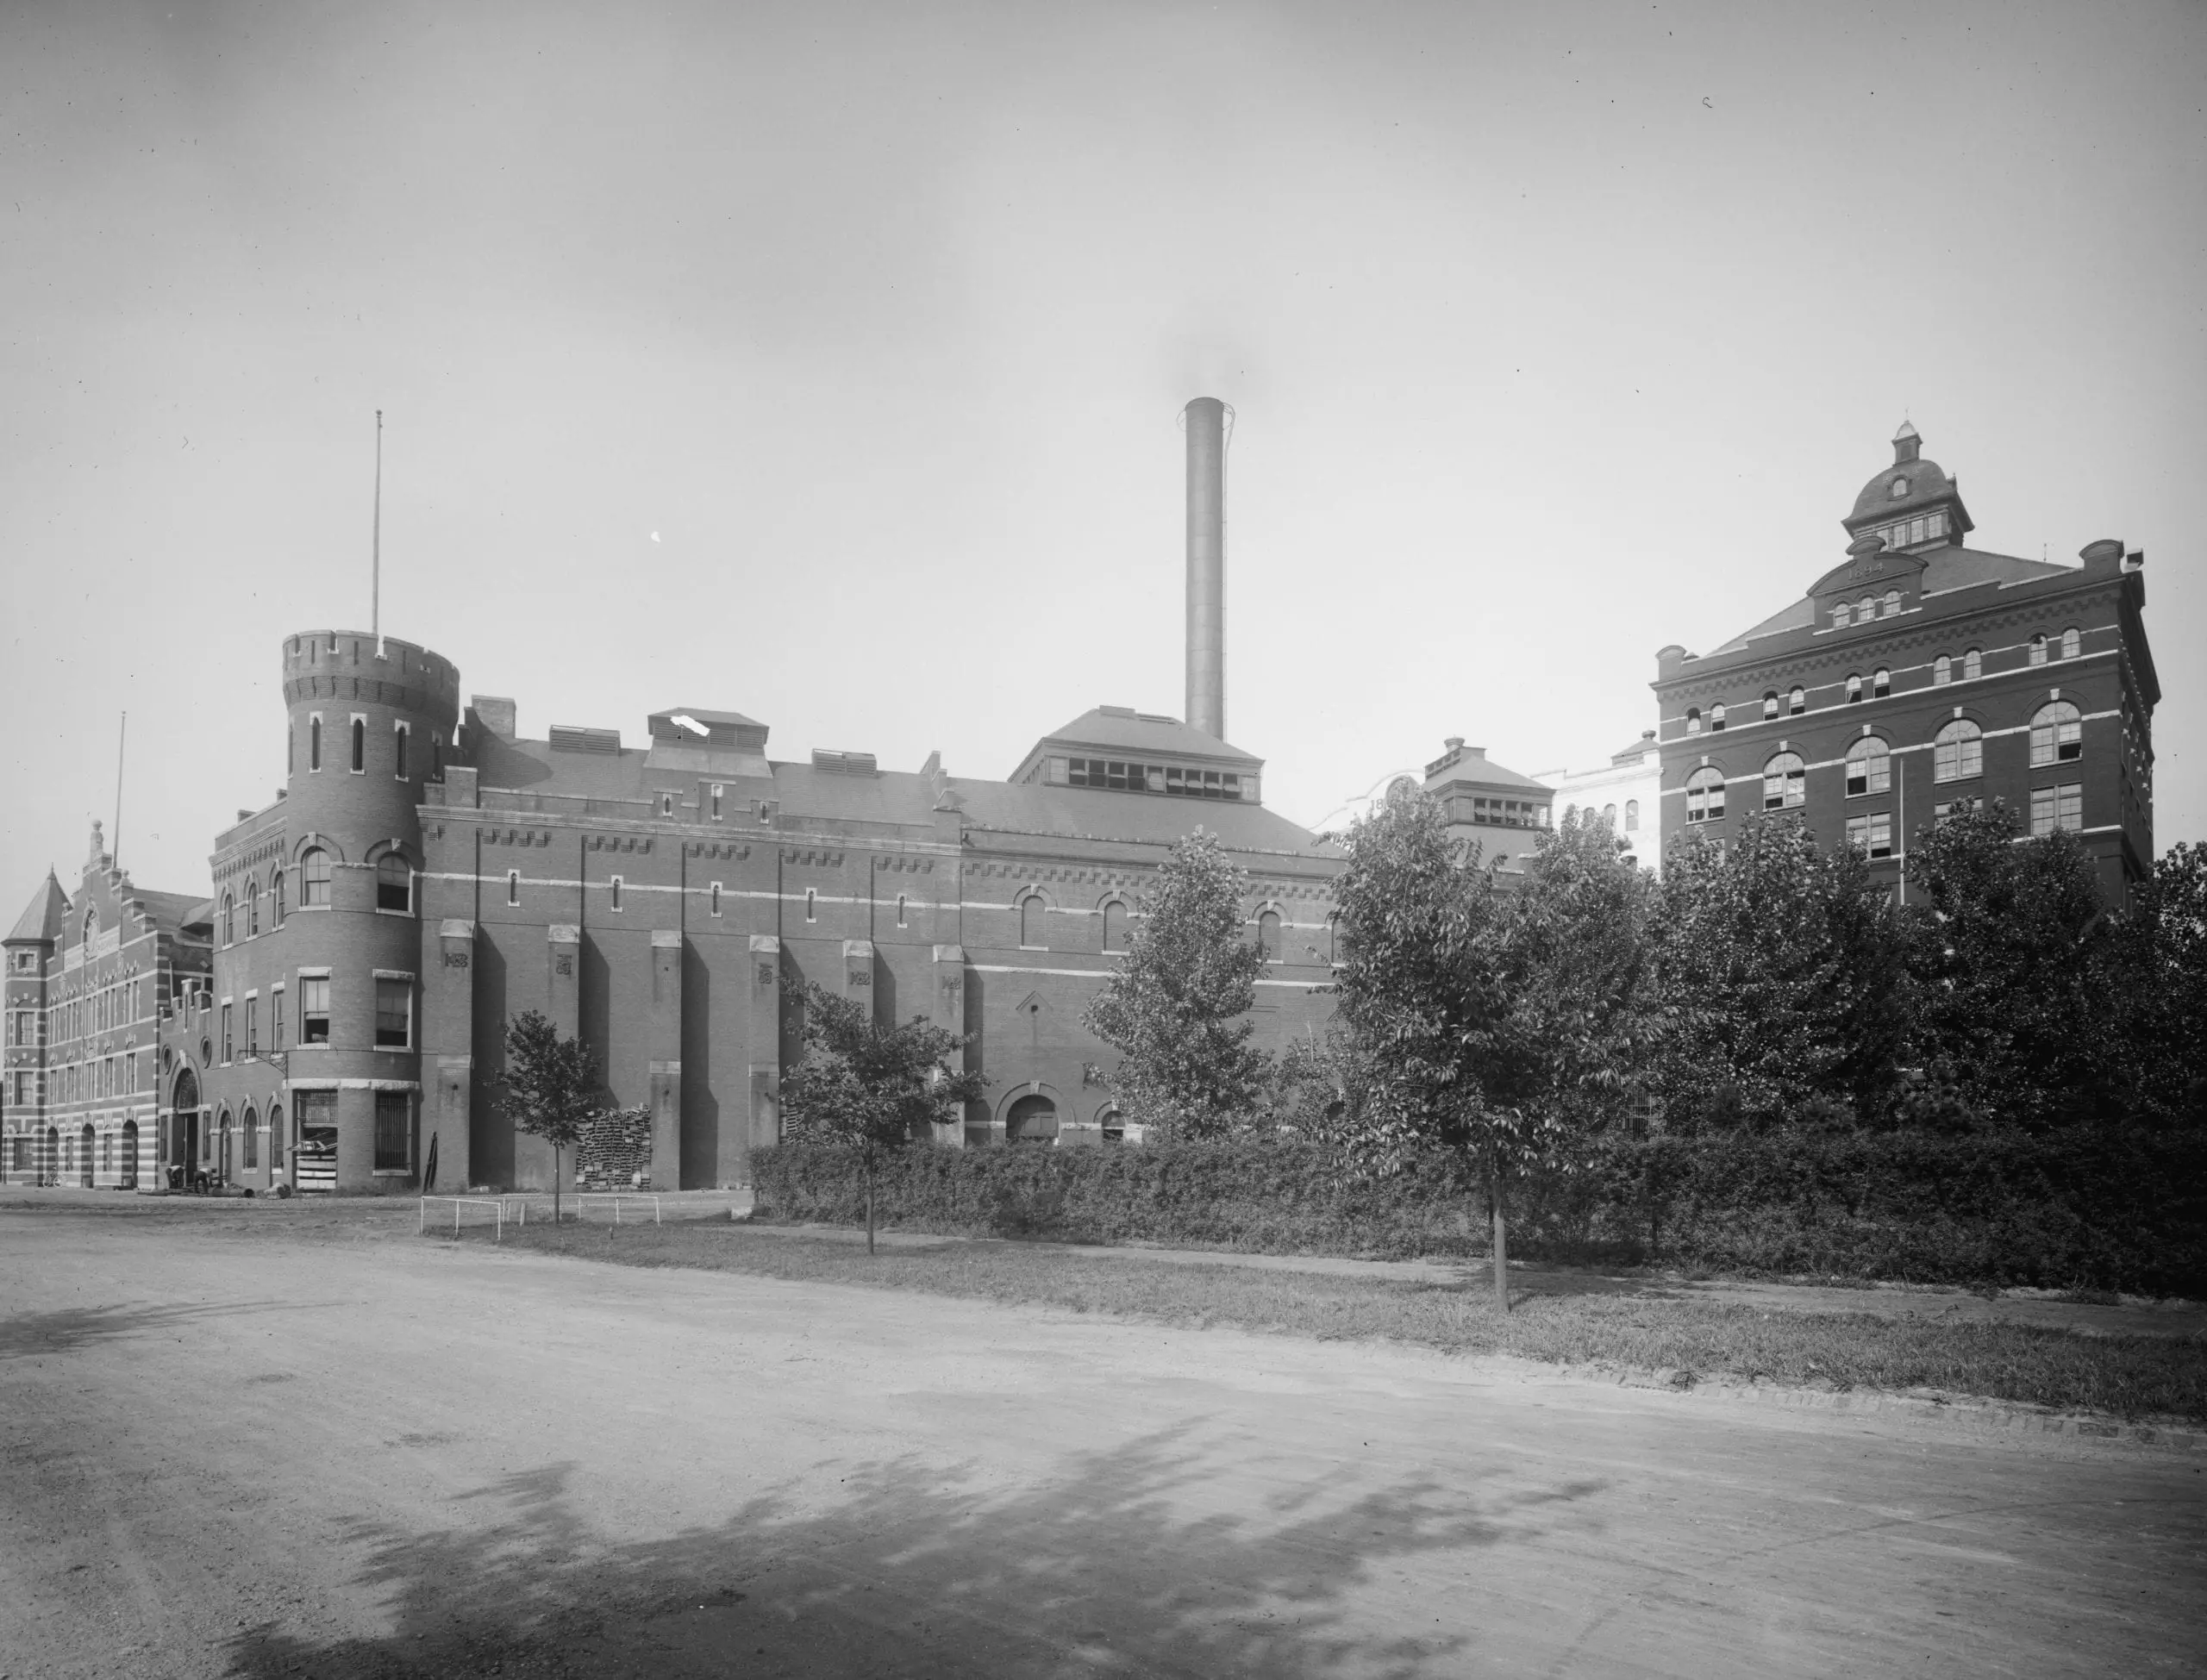 Heurich Brewery in 1910